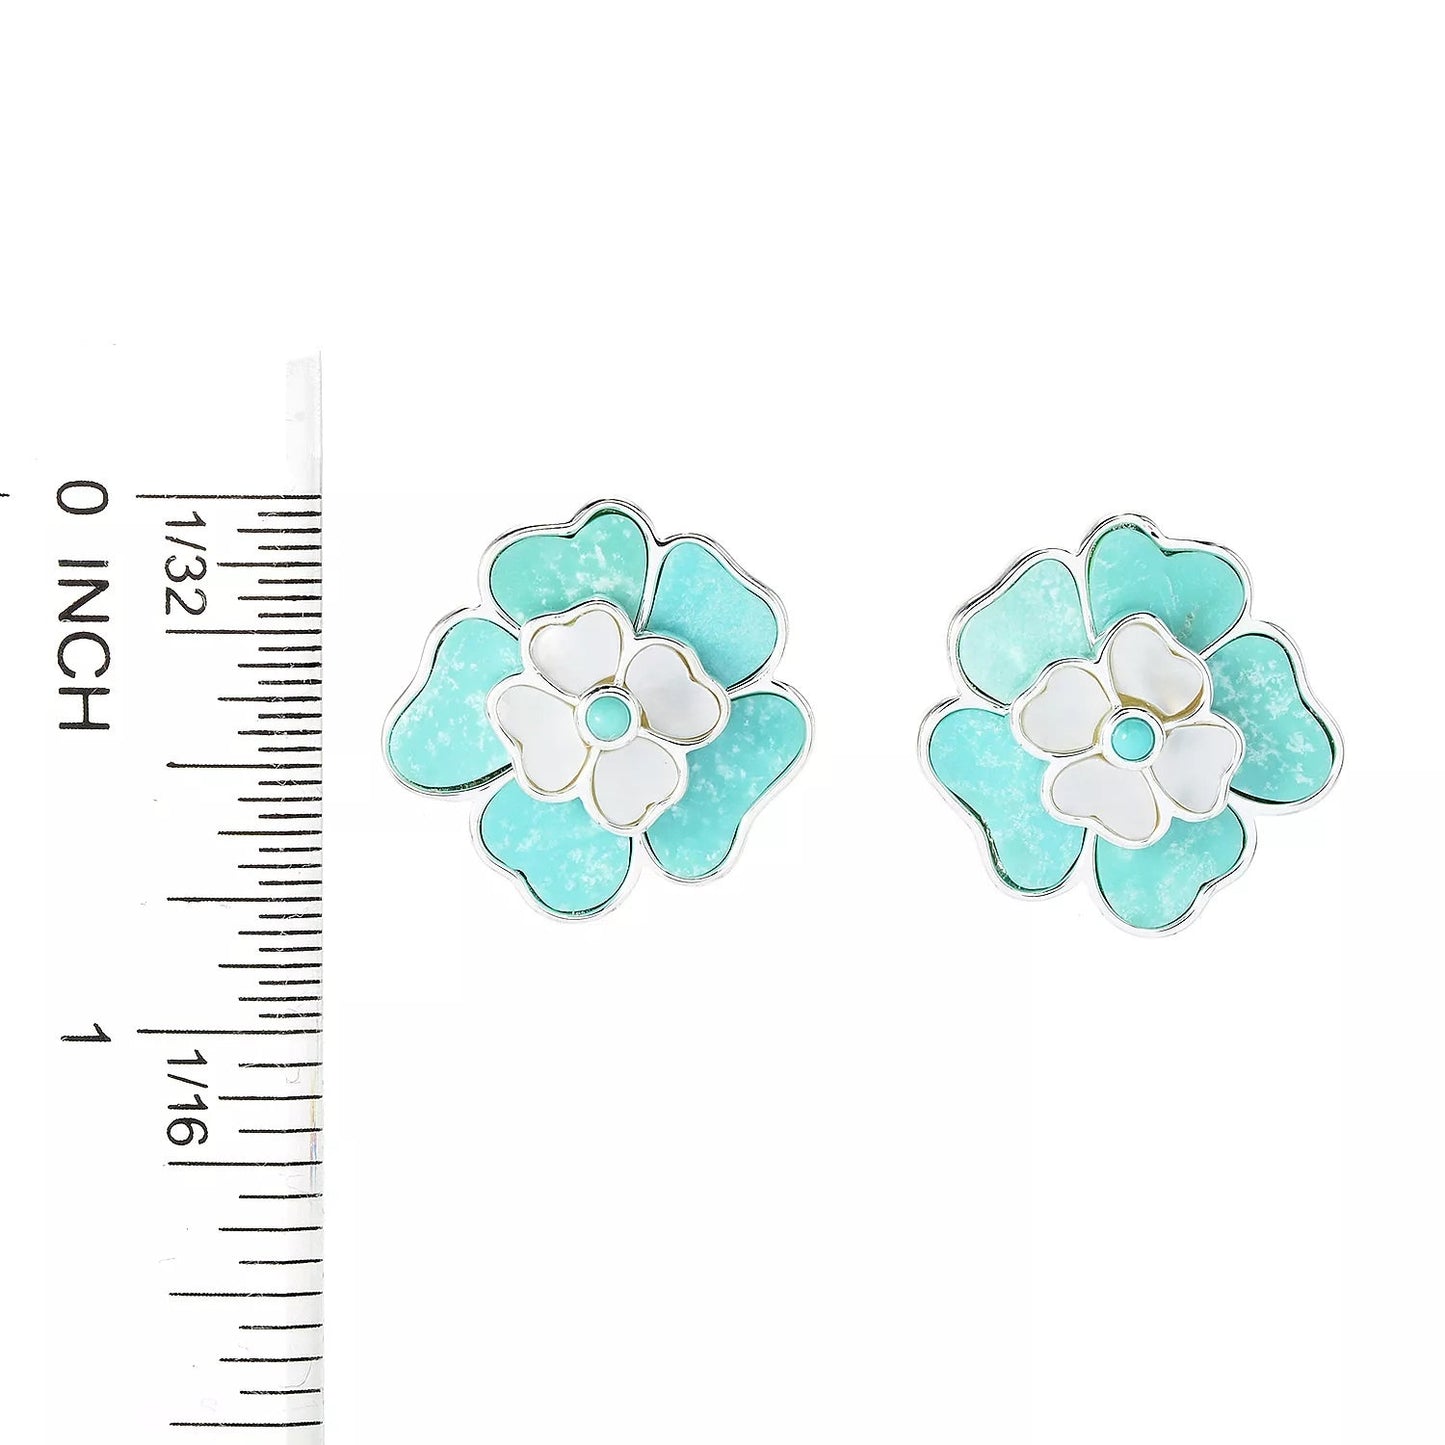 White Mother Of Pearl With Campitos Turquoise Flower Earrings, 925 Sterling Silver Stud Earrings, Everyday Jewelry, Gift For Her